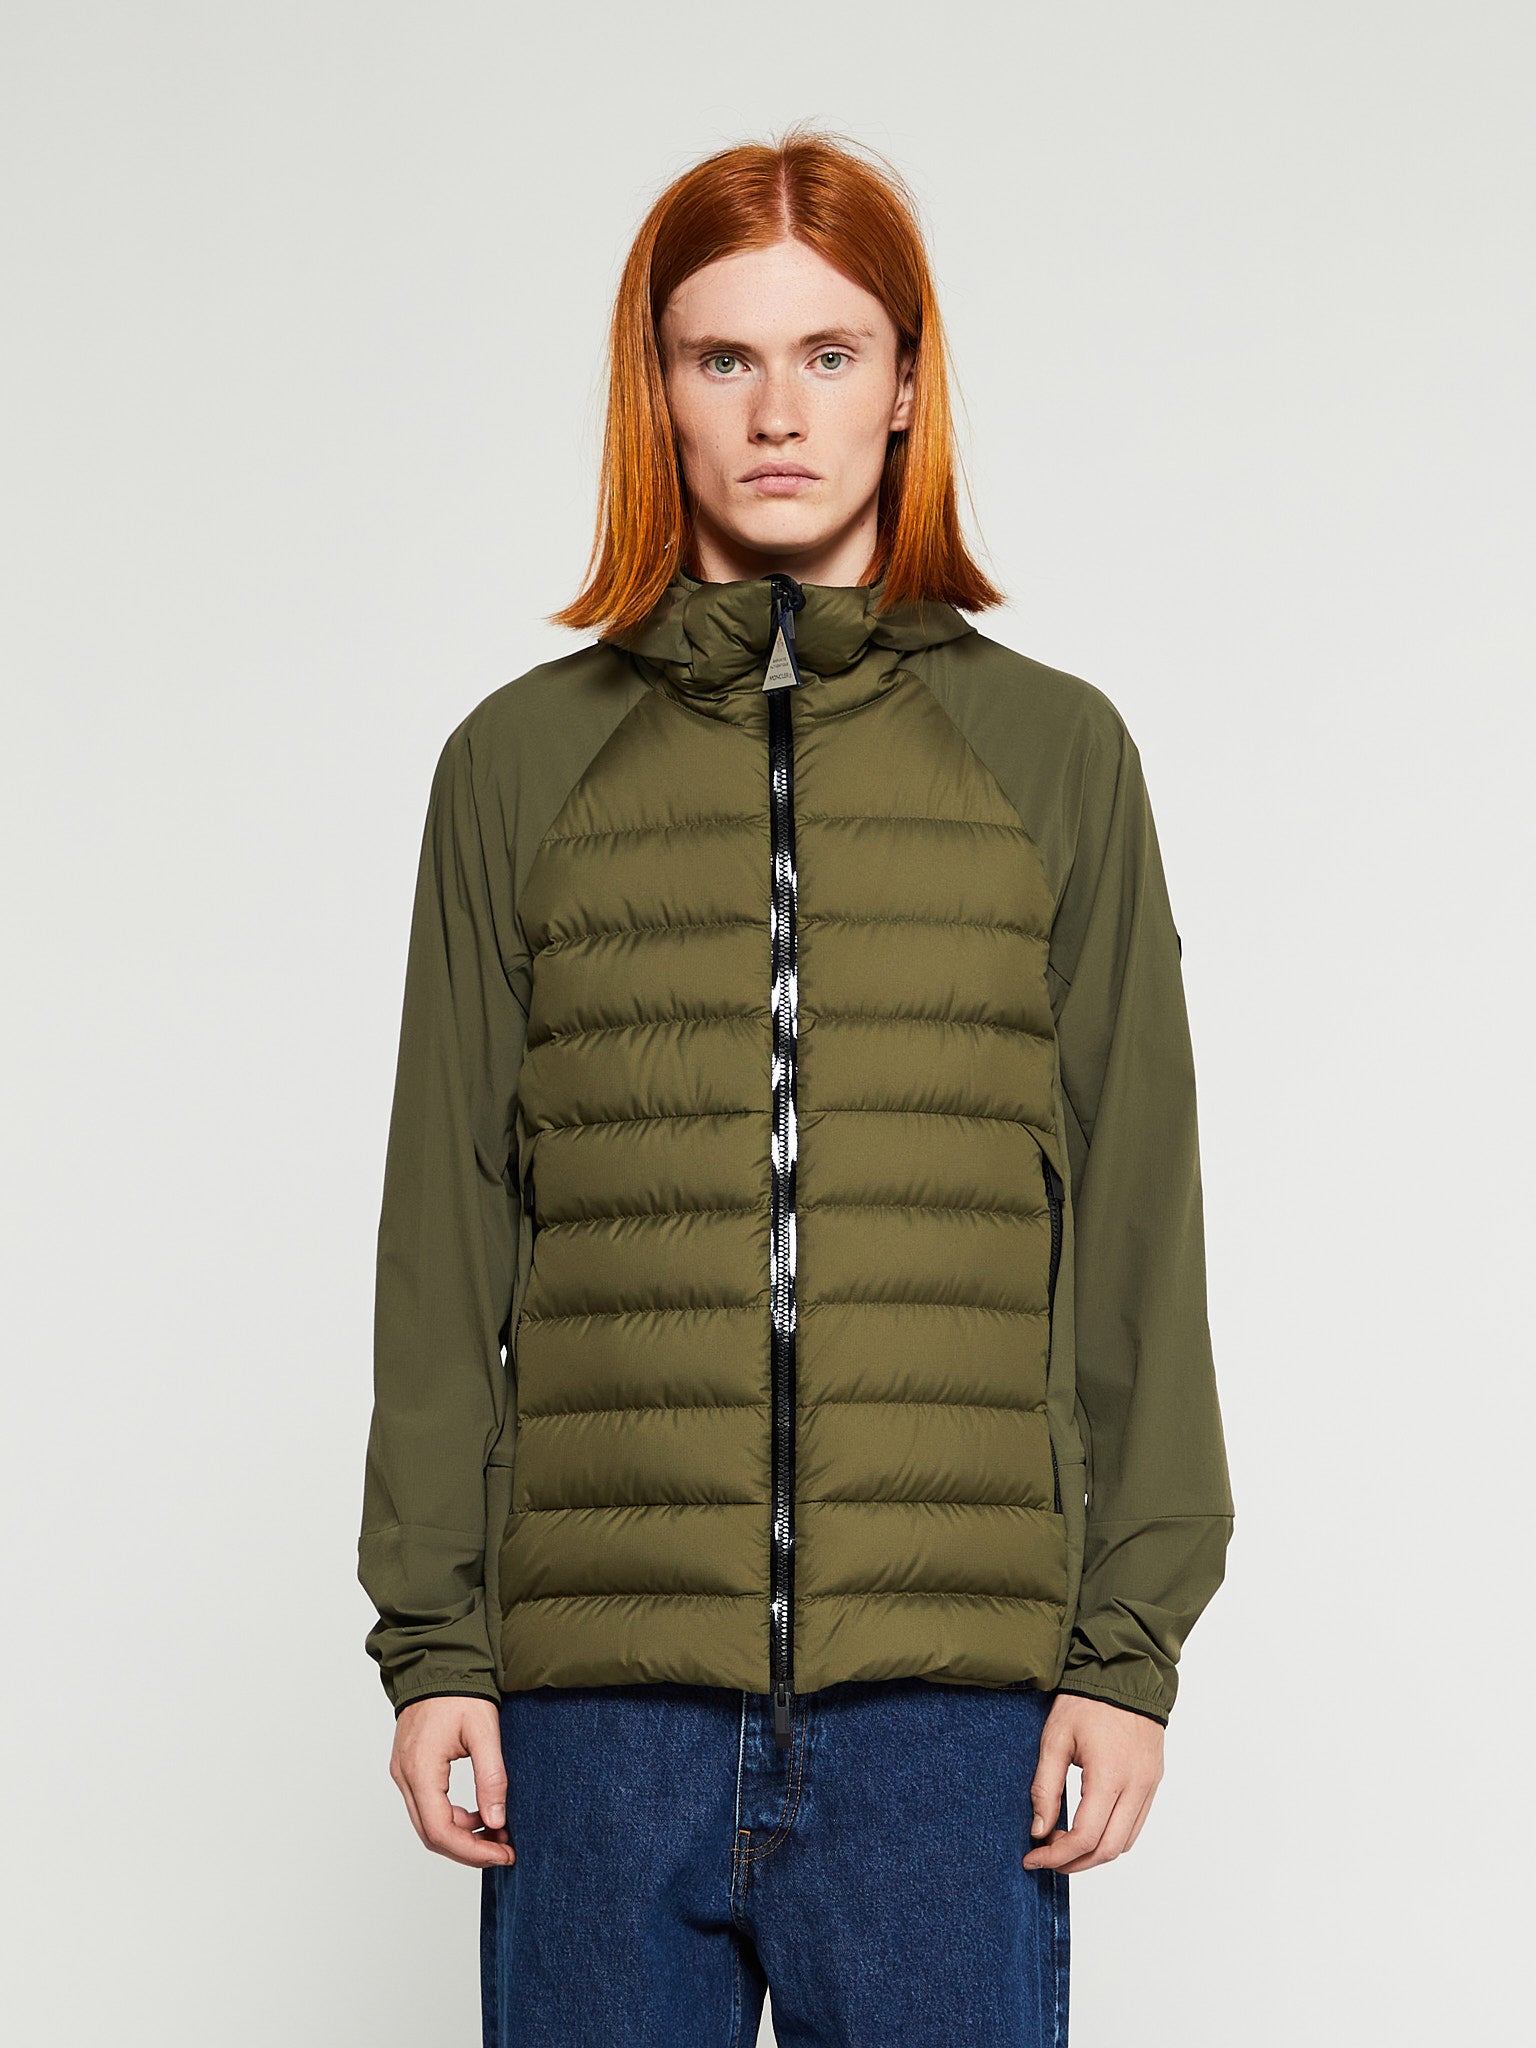 Moncler - Viaur Short Down Jacket in Army Green